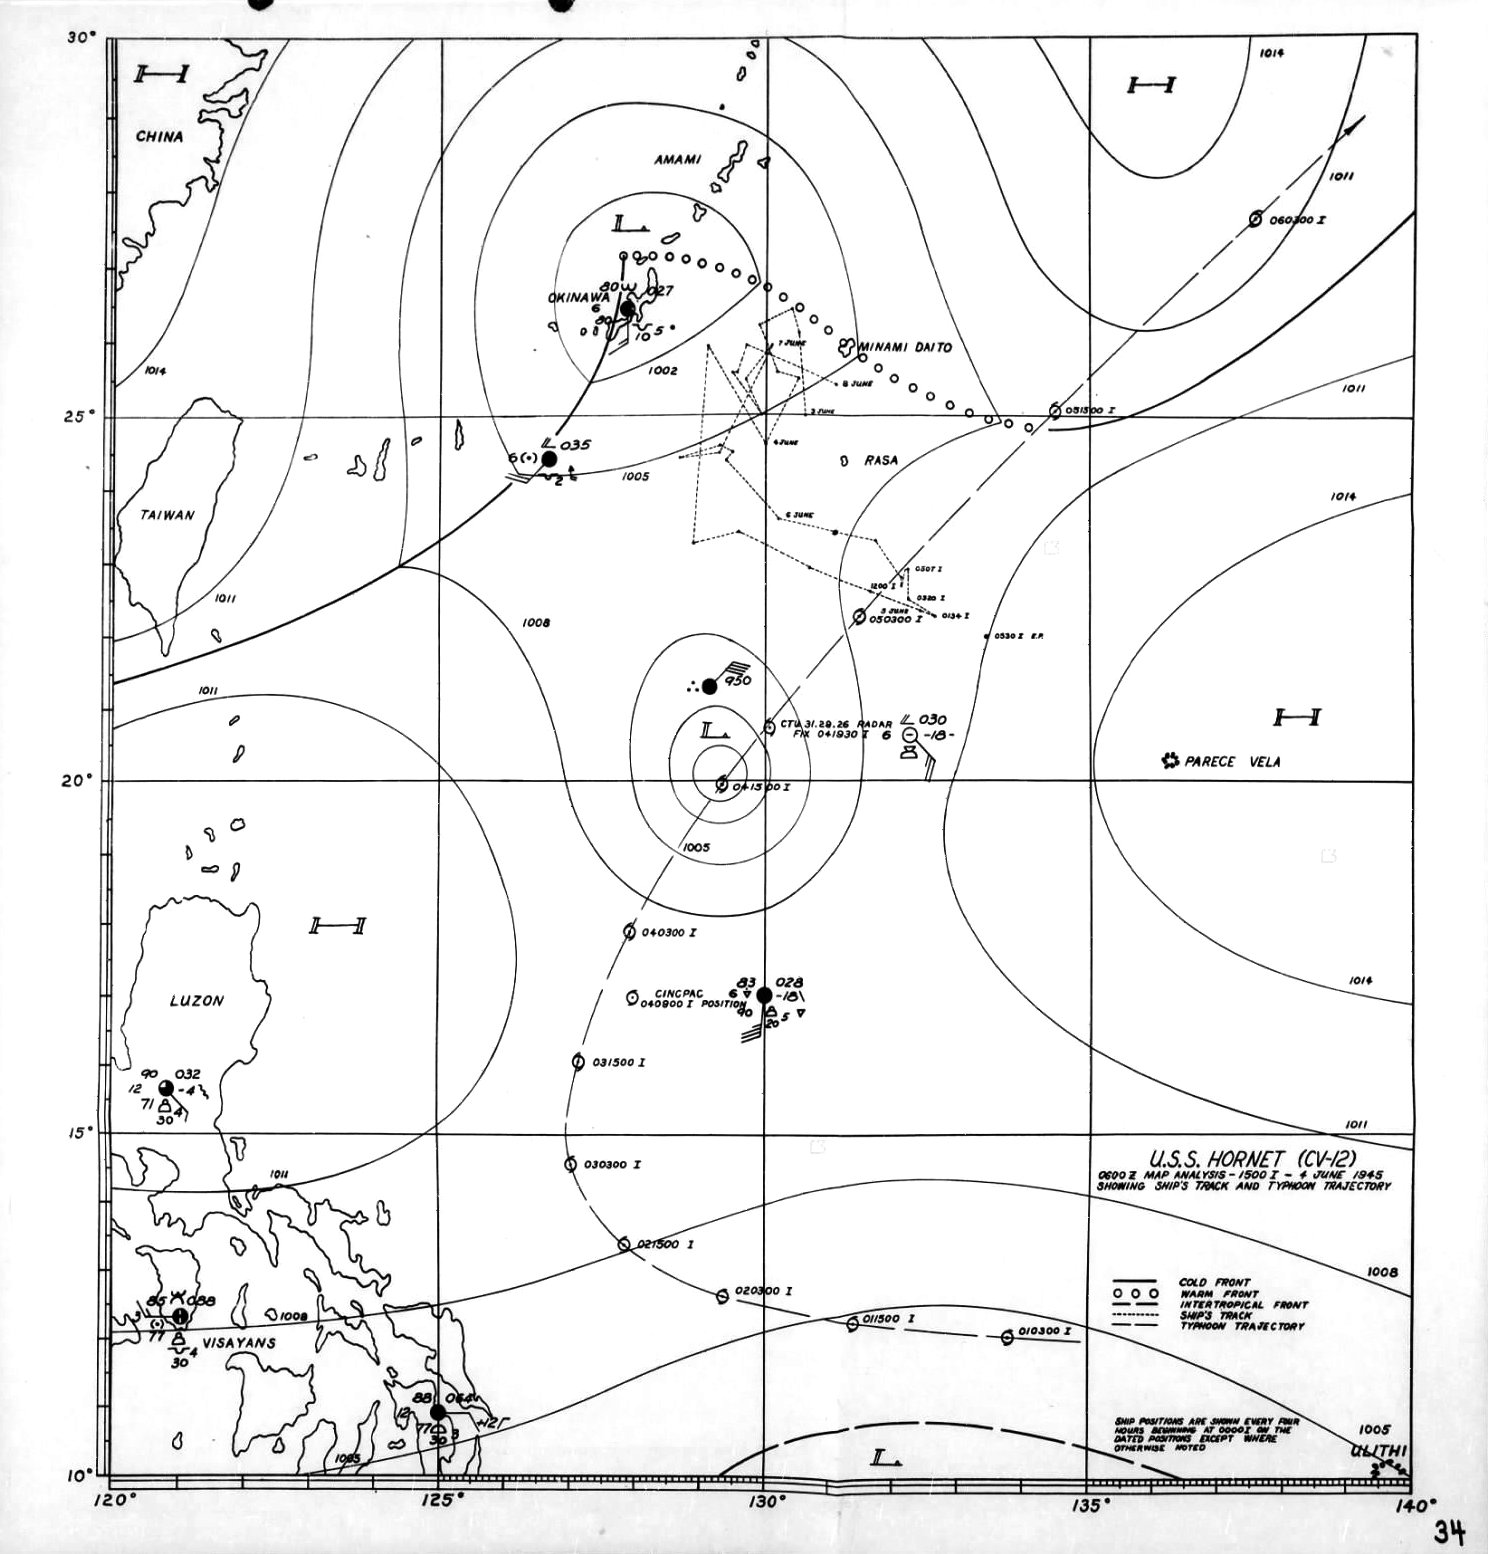 Chart created aboard the USS Hornet (Essex-class) showing the state of the weather in the Philippine Sea at 1500/I on 4 Jun 1945 and showing Typhoon Connie’s track between 1 and 6 Jun 1945.